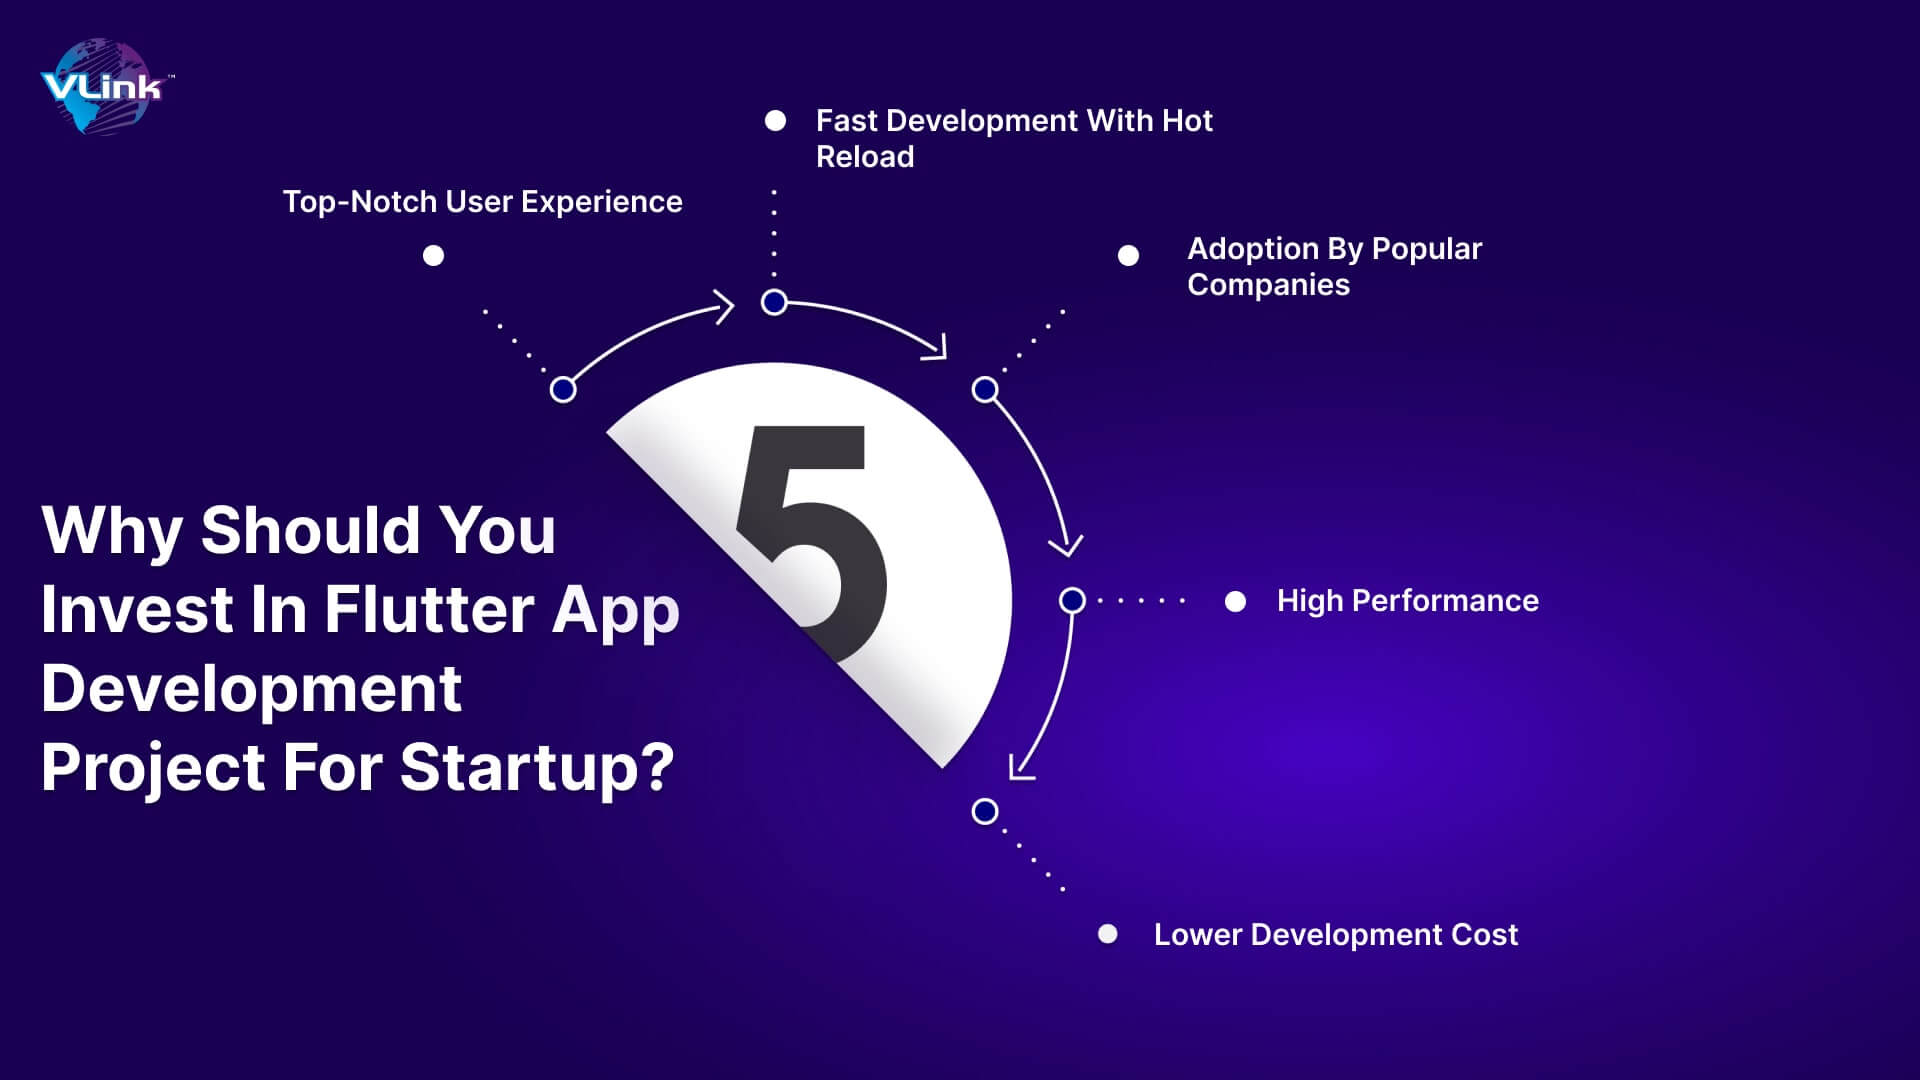 Why Should You Invest in the Flutter App Development Project for Startup 